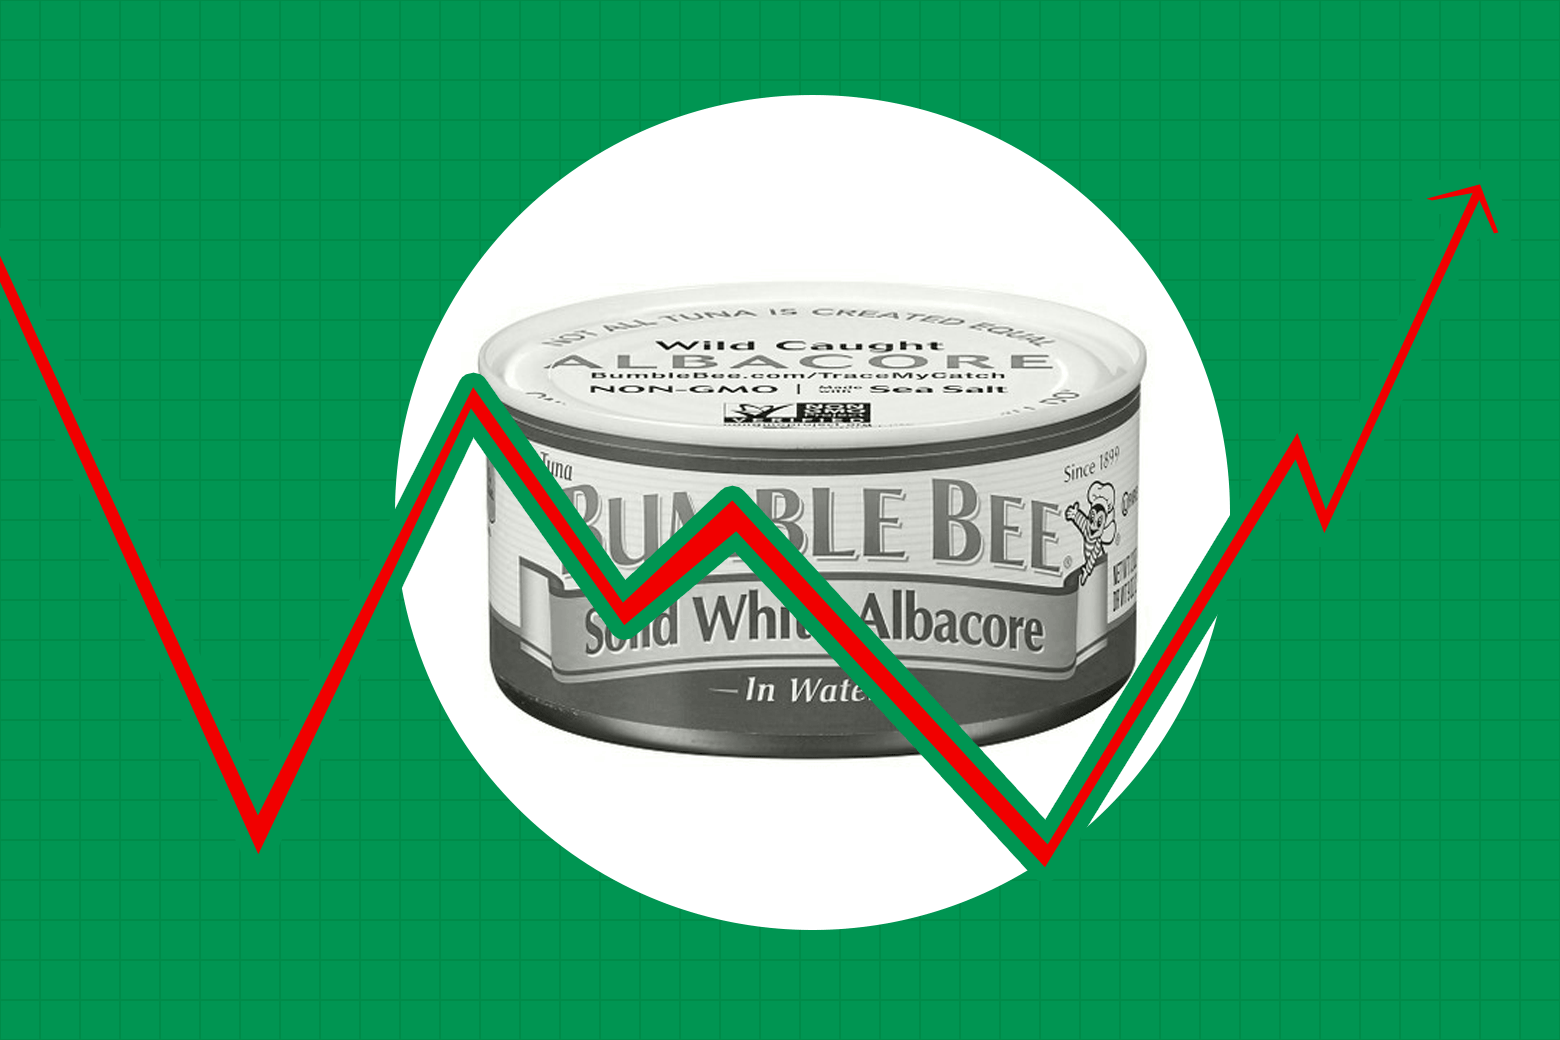 Can of Bumble Bee tuna seen against the backdrop of a stocks chart